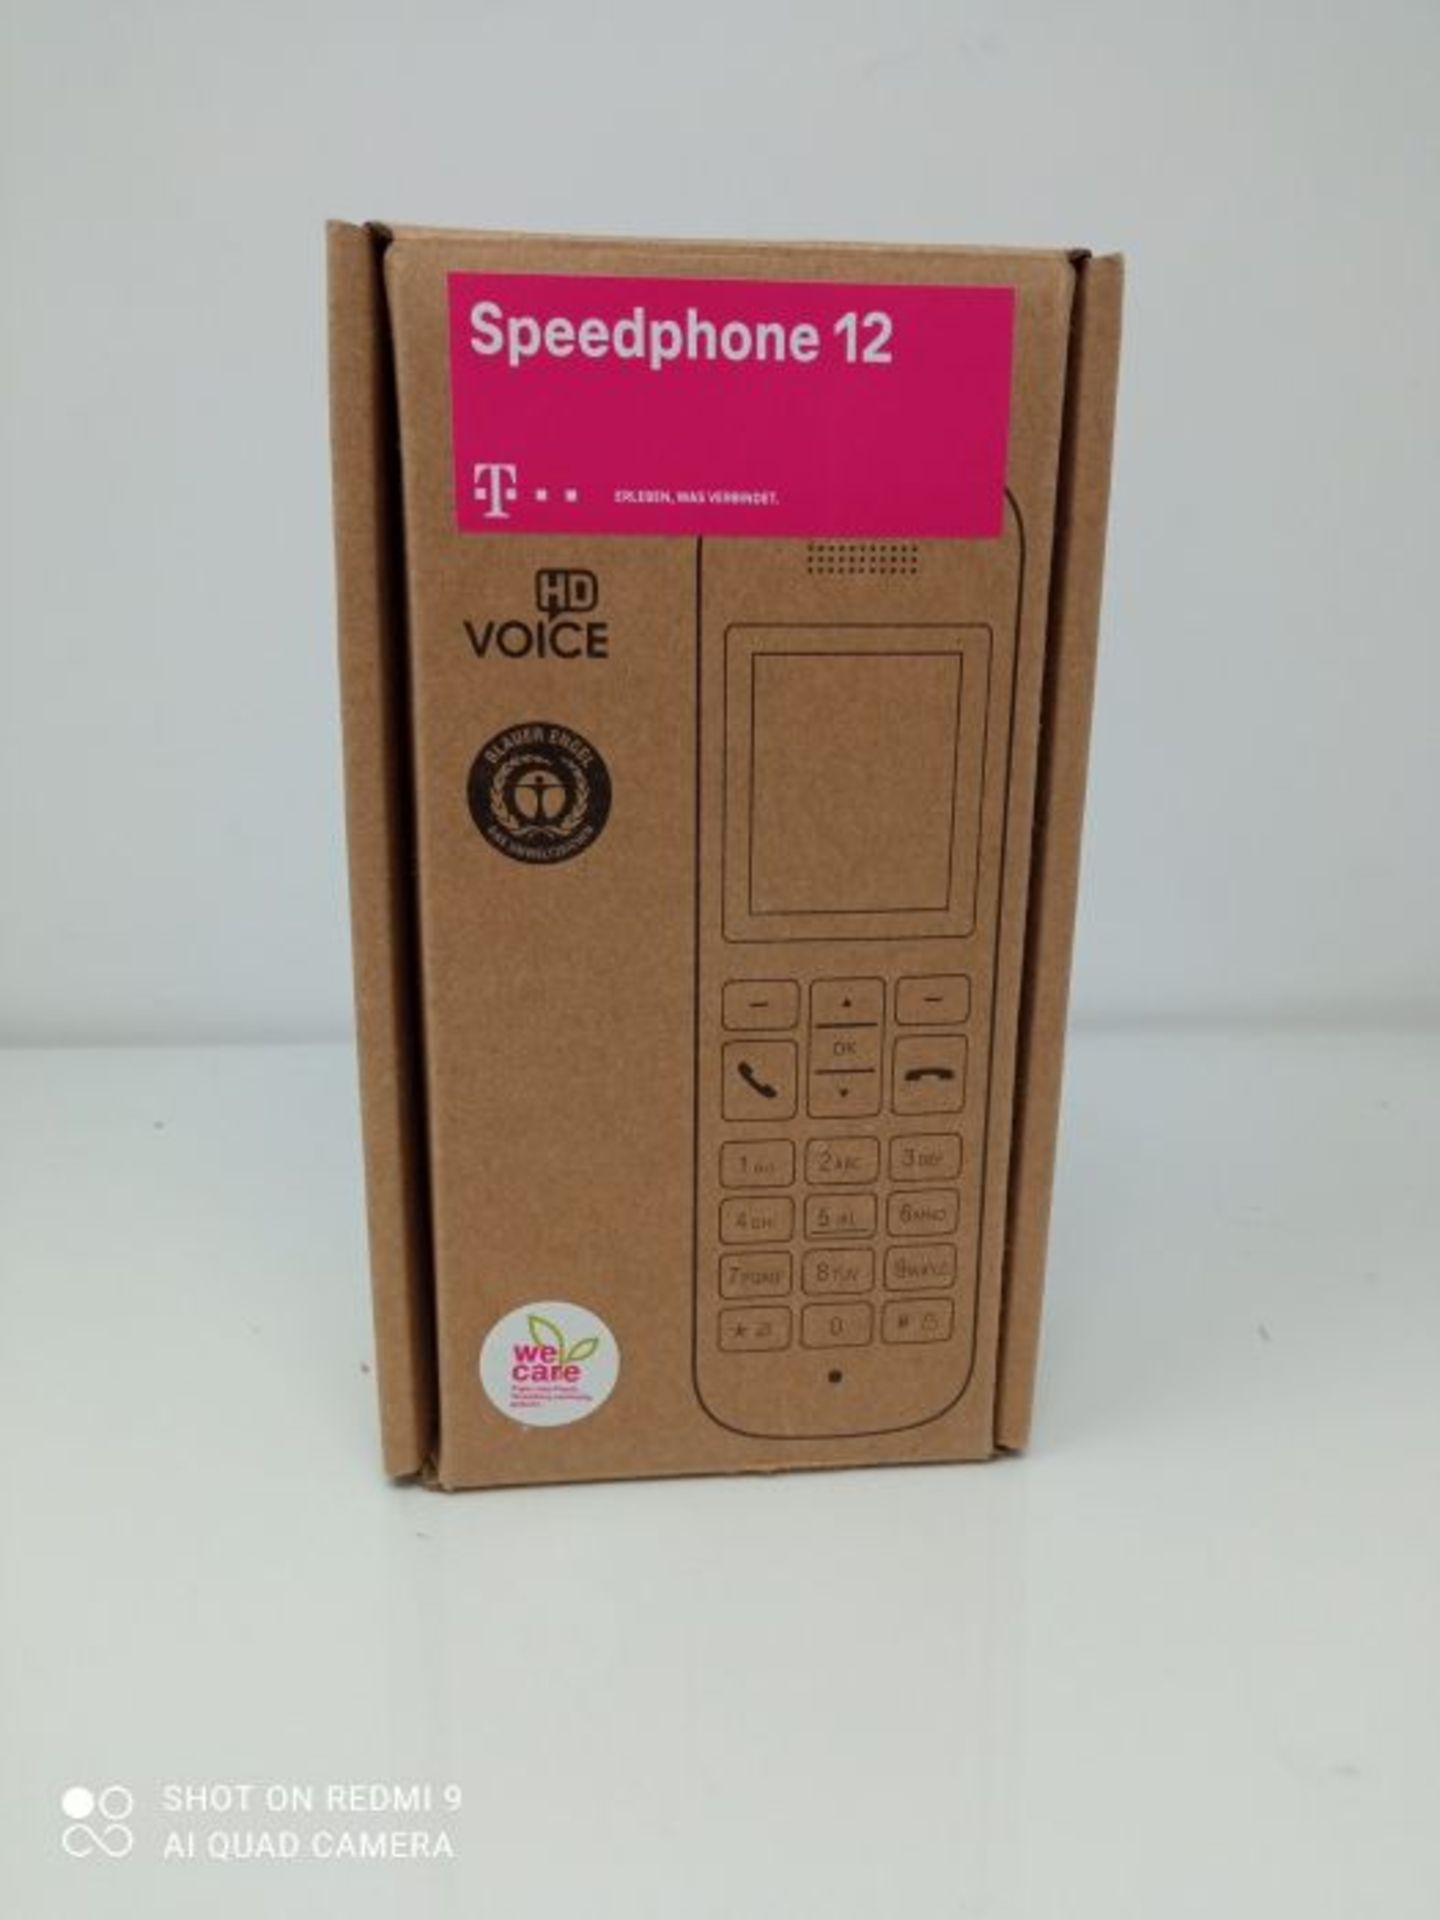 Telekom landline phone Speedphone 12 in white cordless | For use on current routers wi - Image 2 of 3